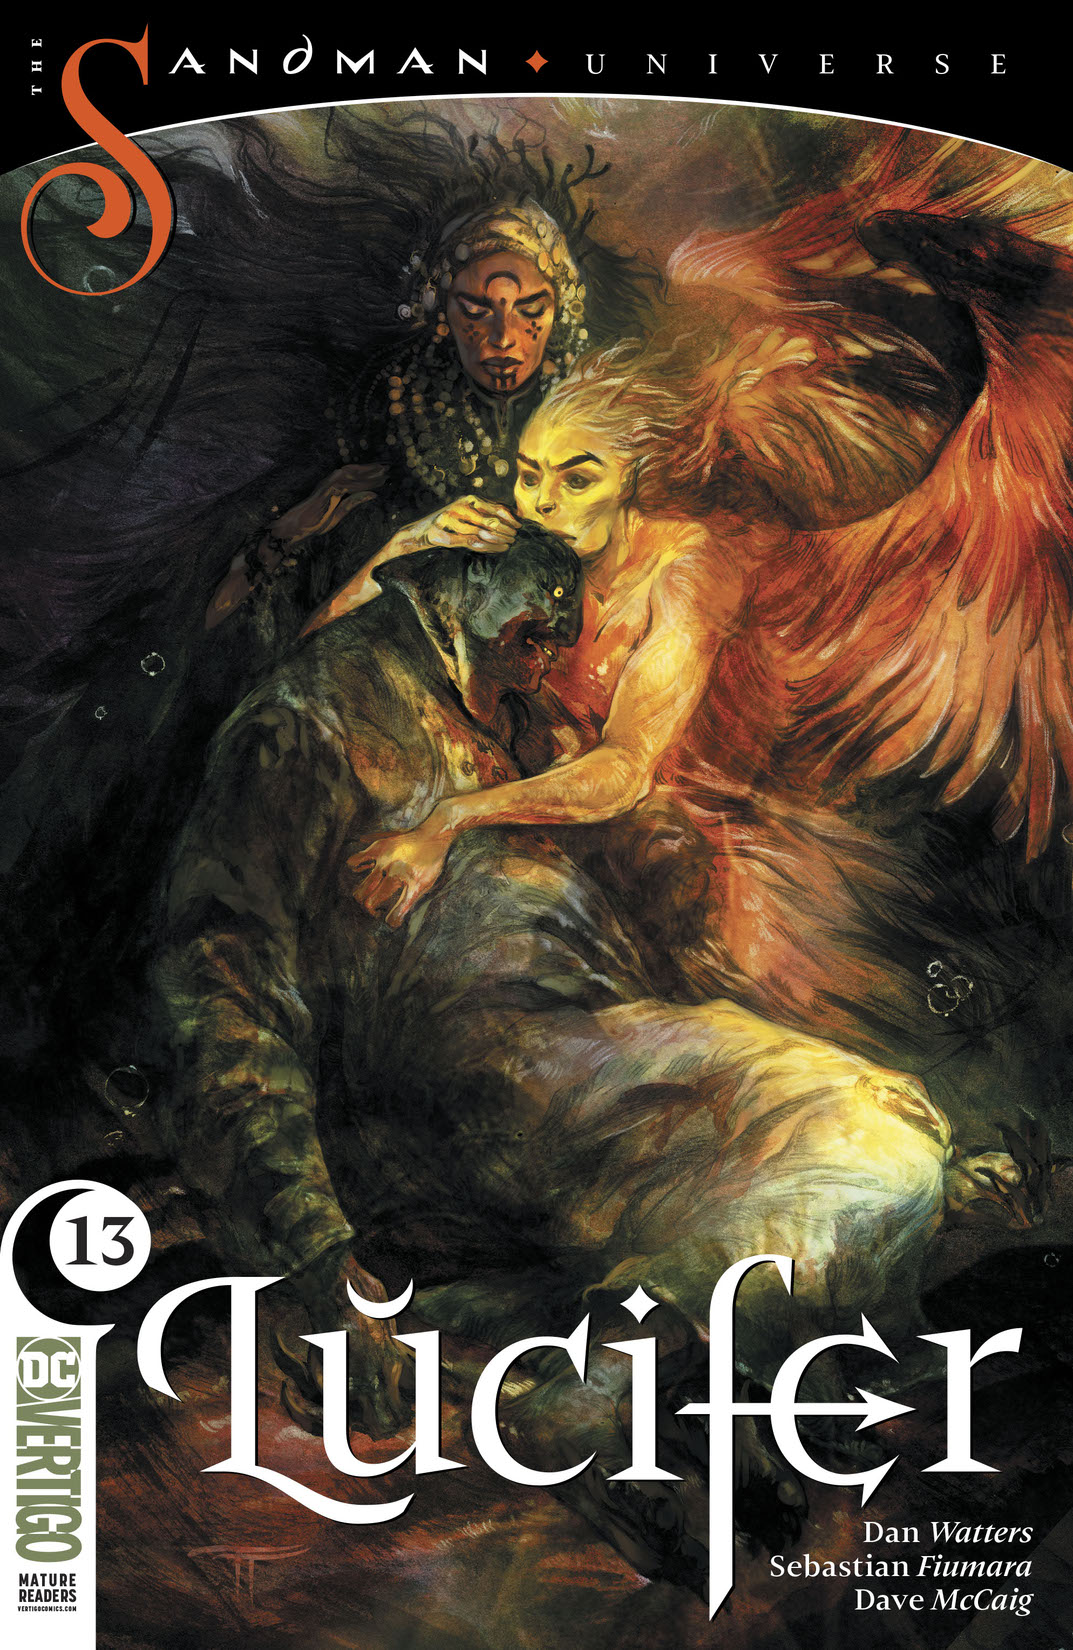 Lucifer #13 preview images